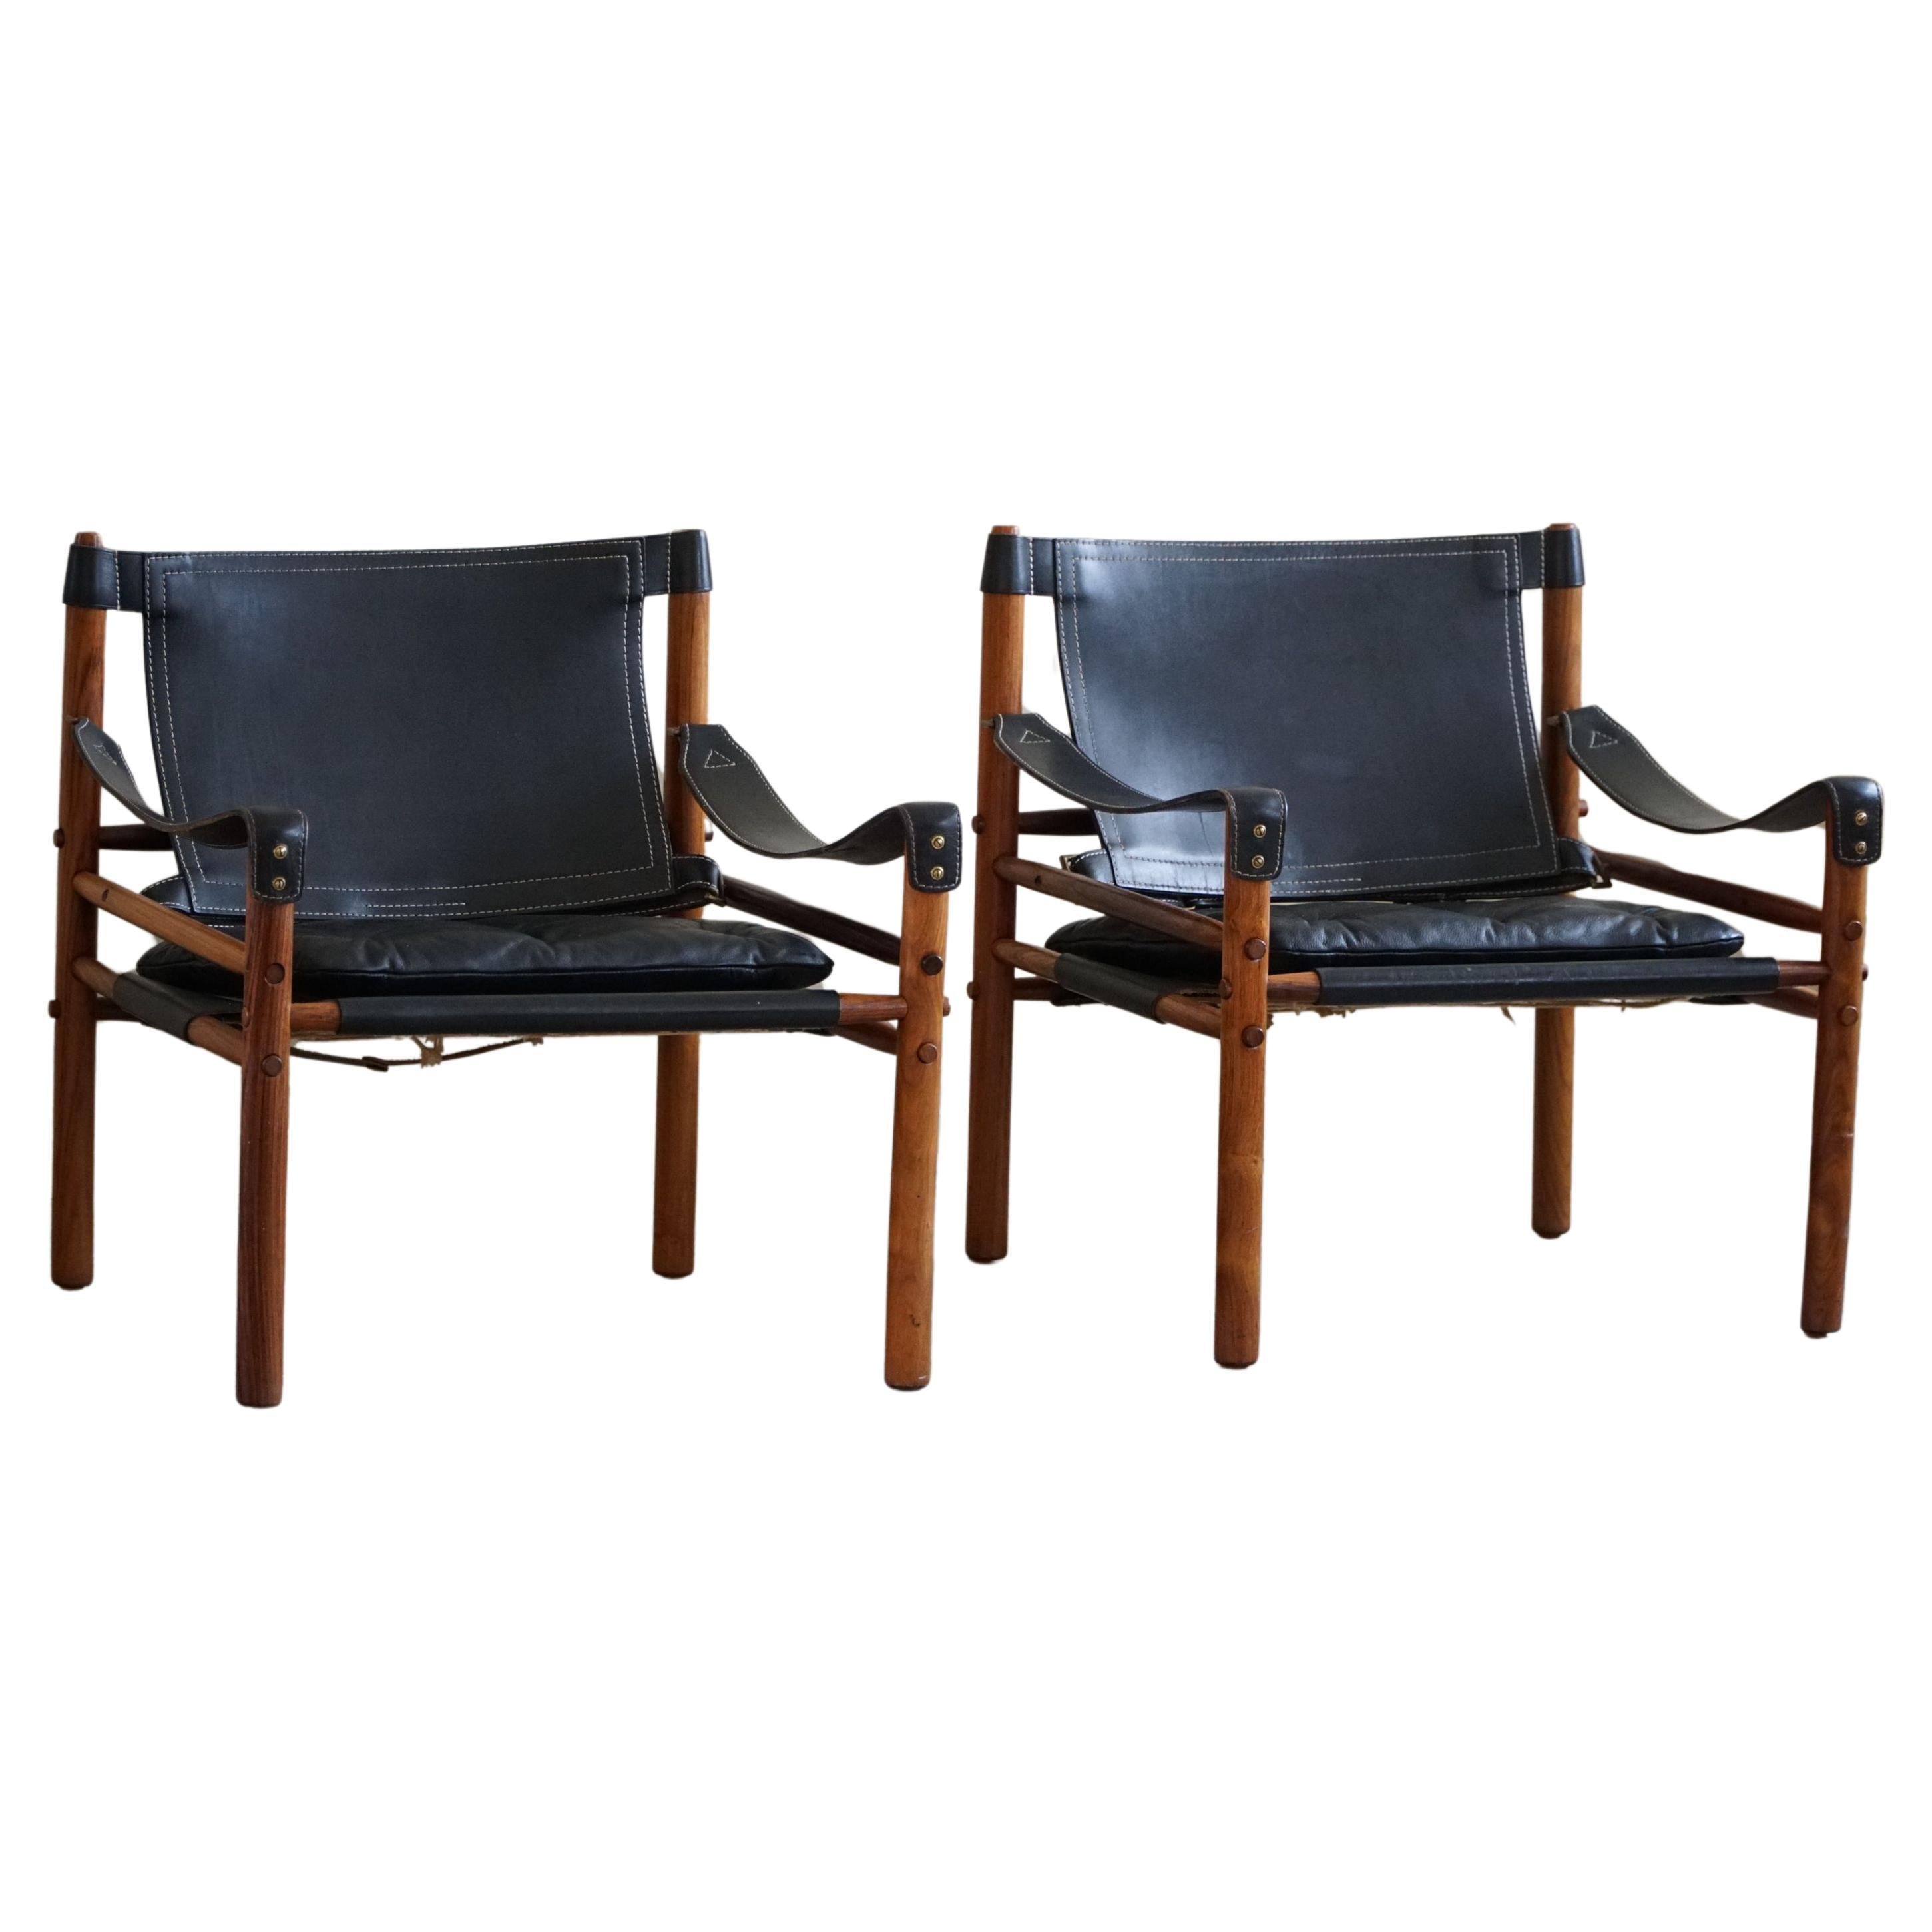 Pair of Sirocco Lounge Chairs in Rosewood, Arne Norell, Ab Aneby, 1960s For Sale